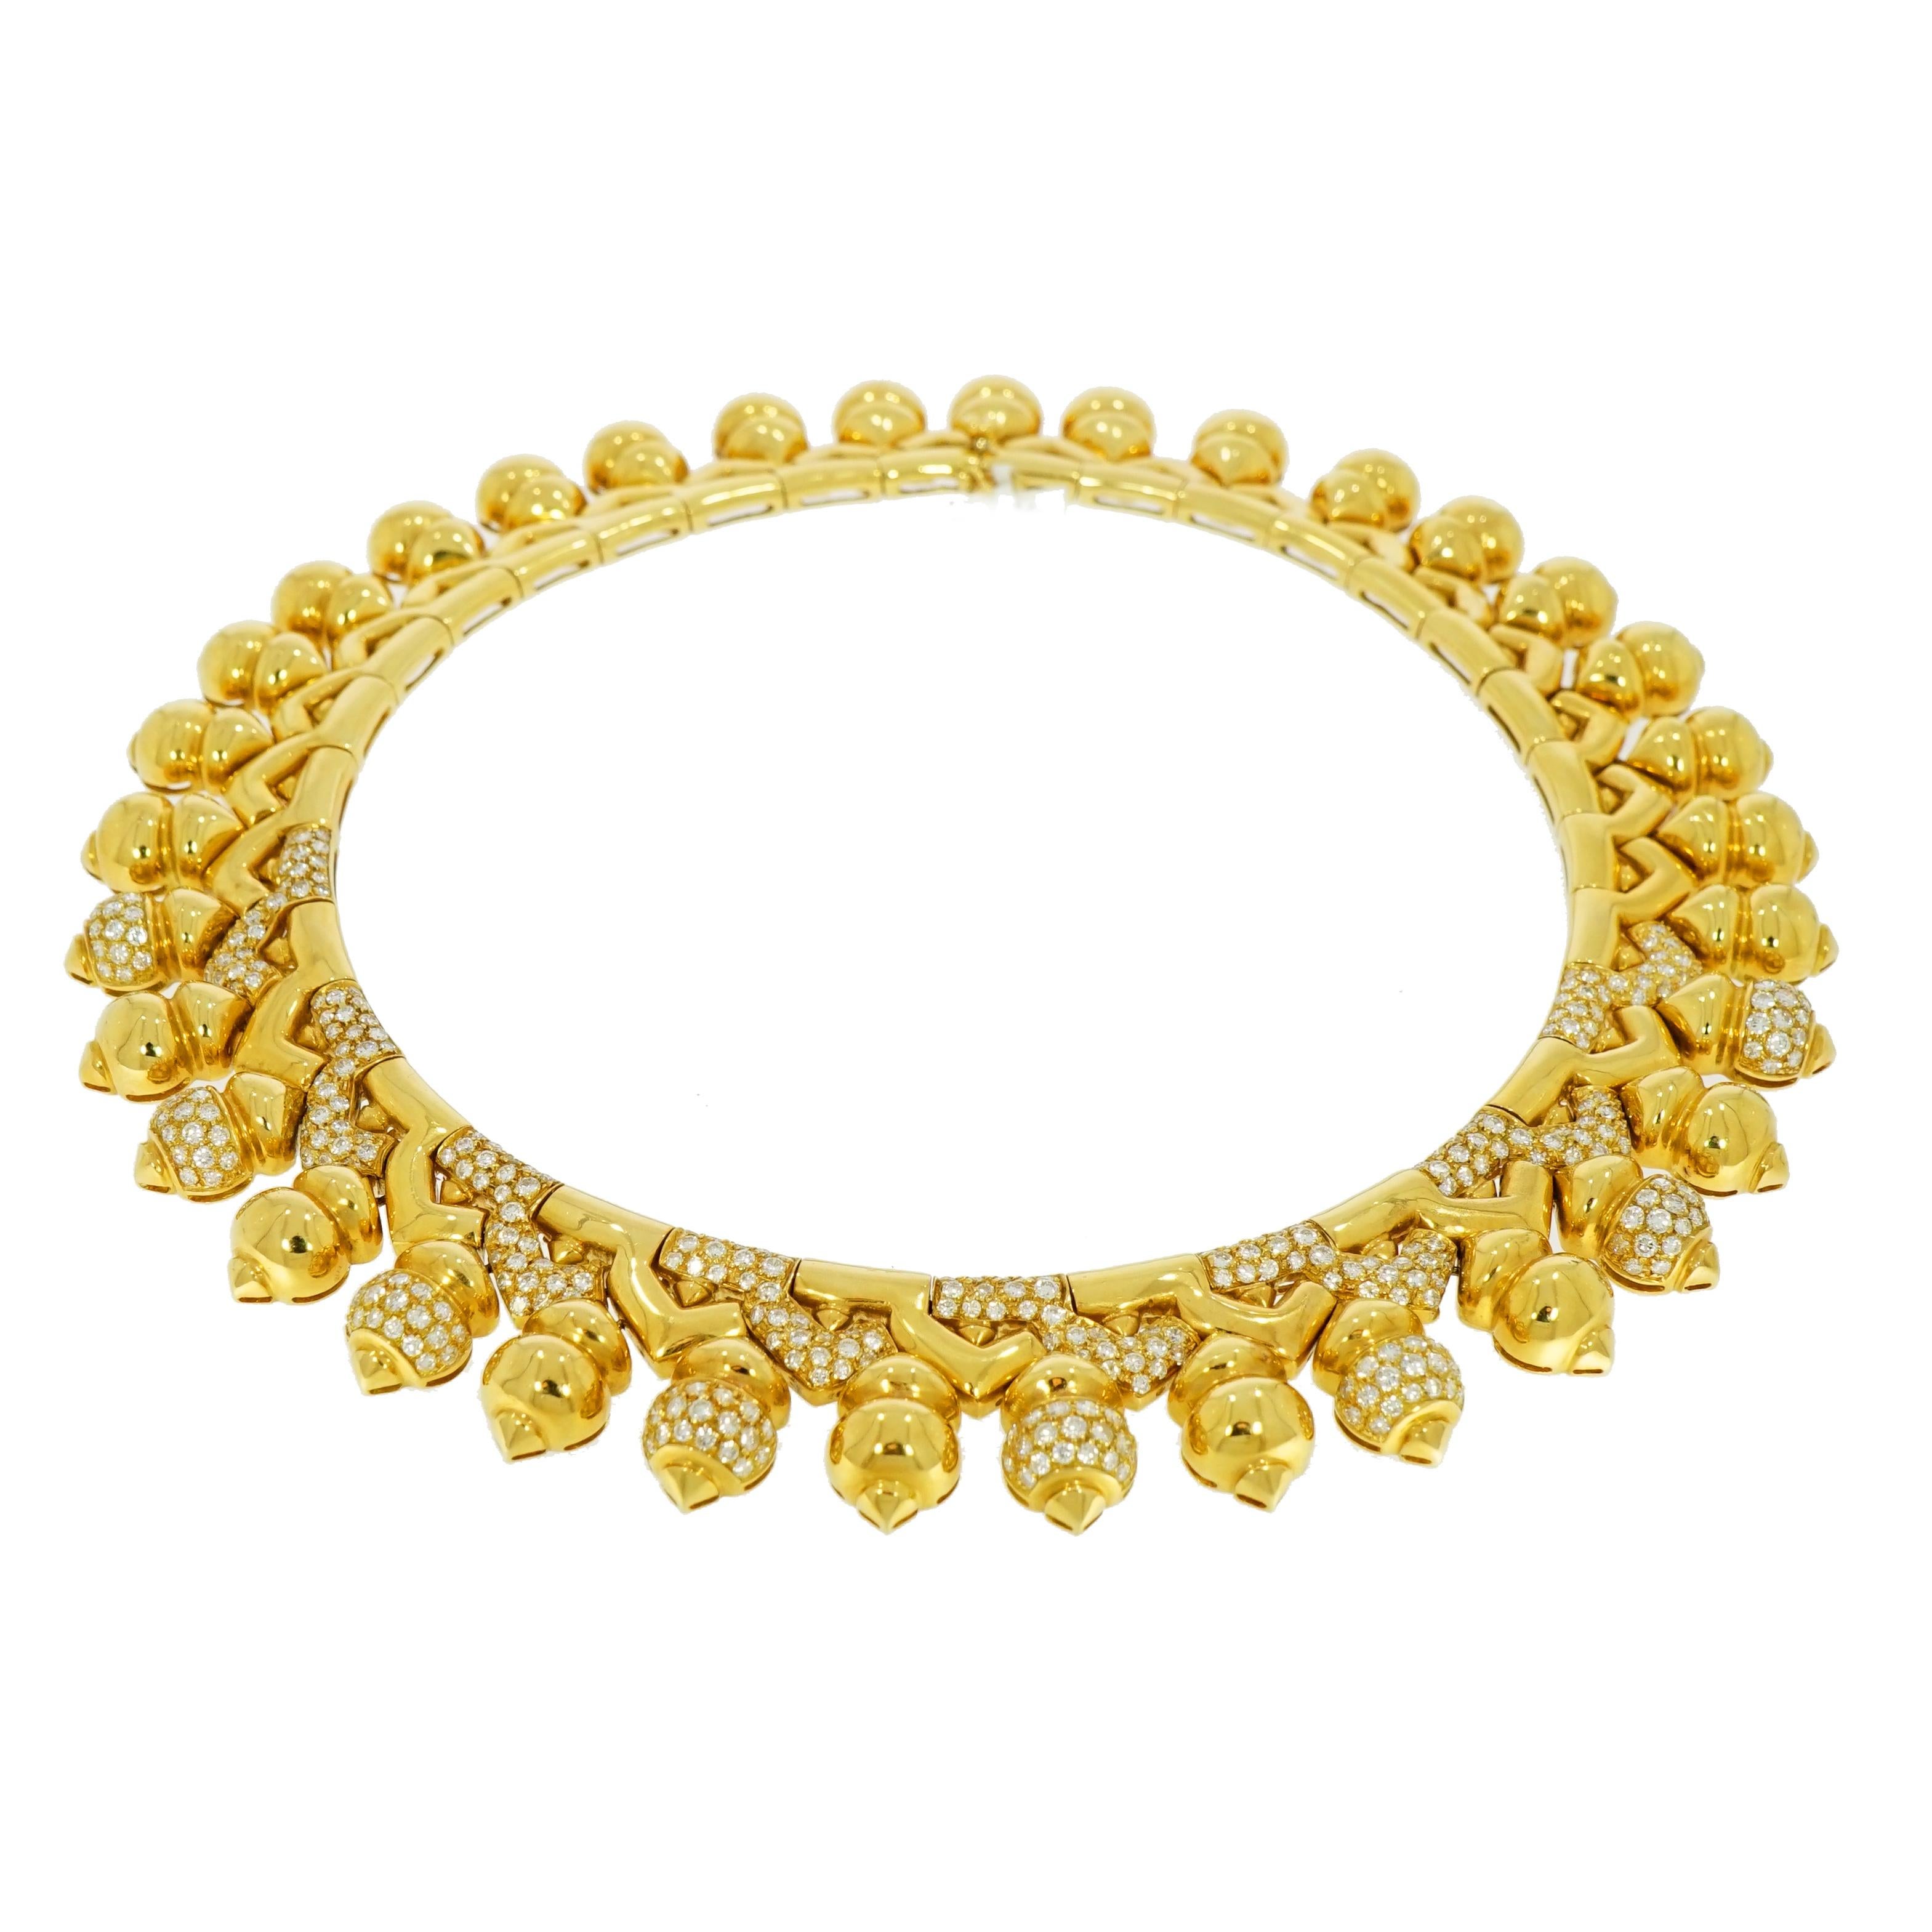 Classic and sophisticated, this vintage style necklace is one of a kind! 
The design is elegant and richly adorned with diamonds making it look gorgeous. 
Crafted in 18k yellow gold and near colorless round diamonds.
It has a beautiful and eye